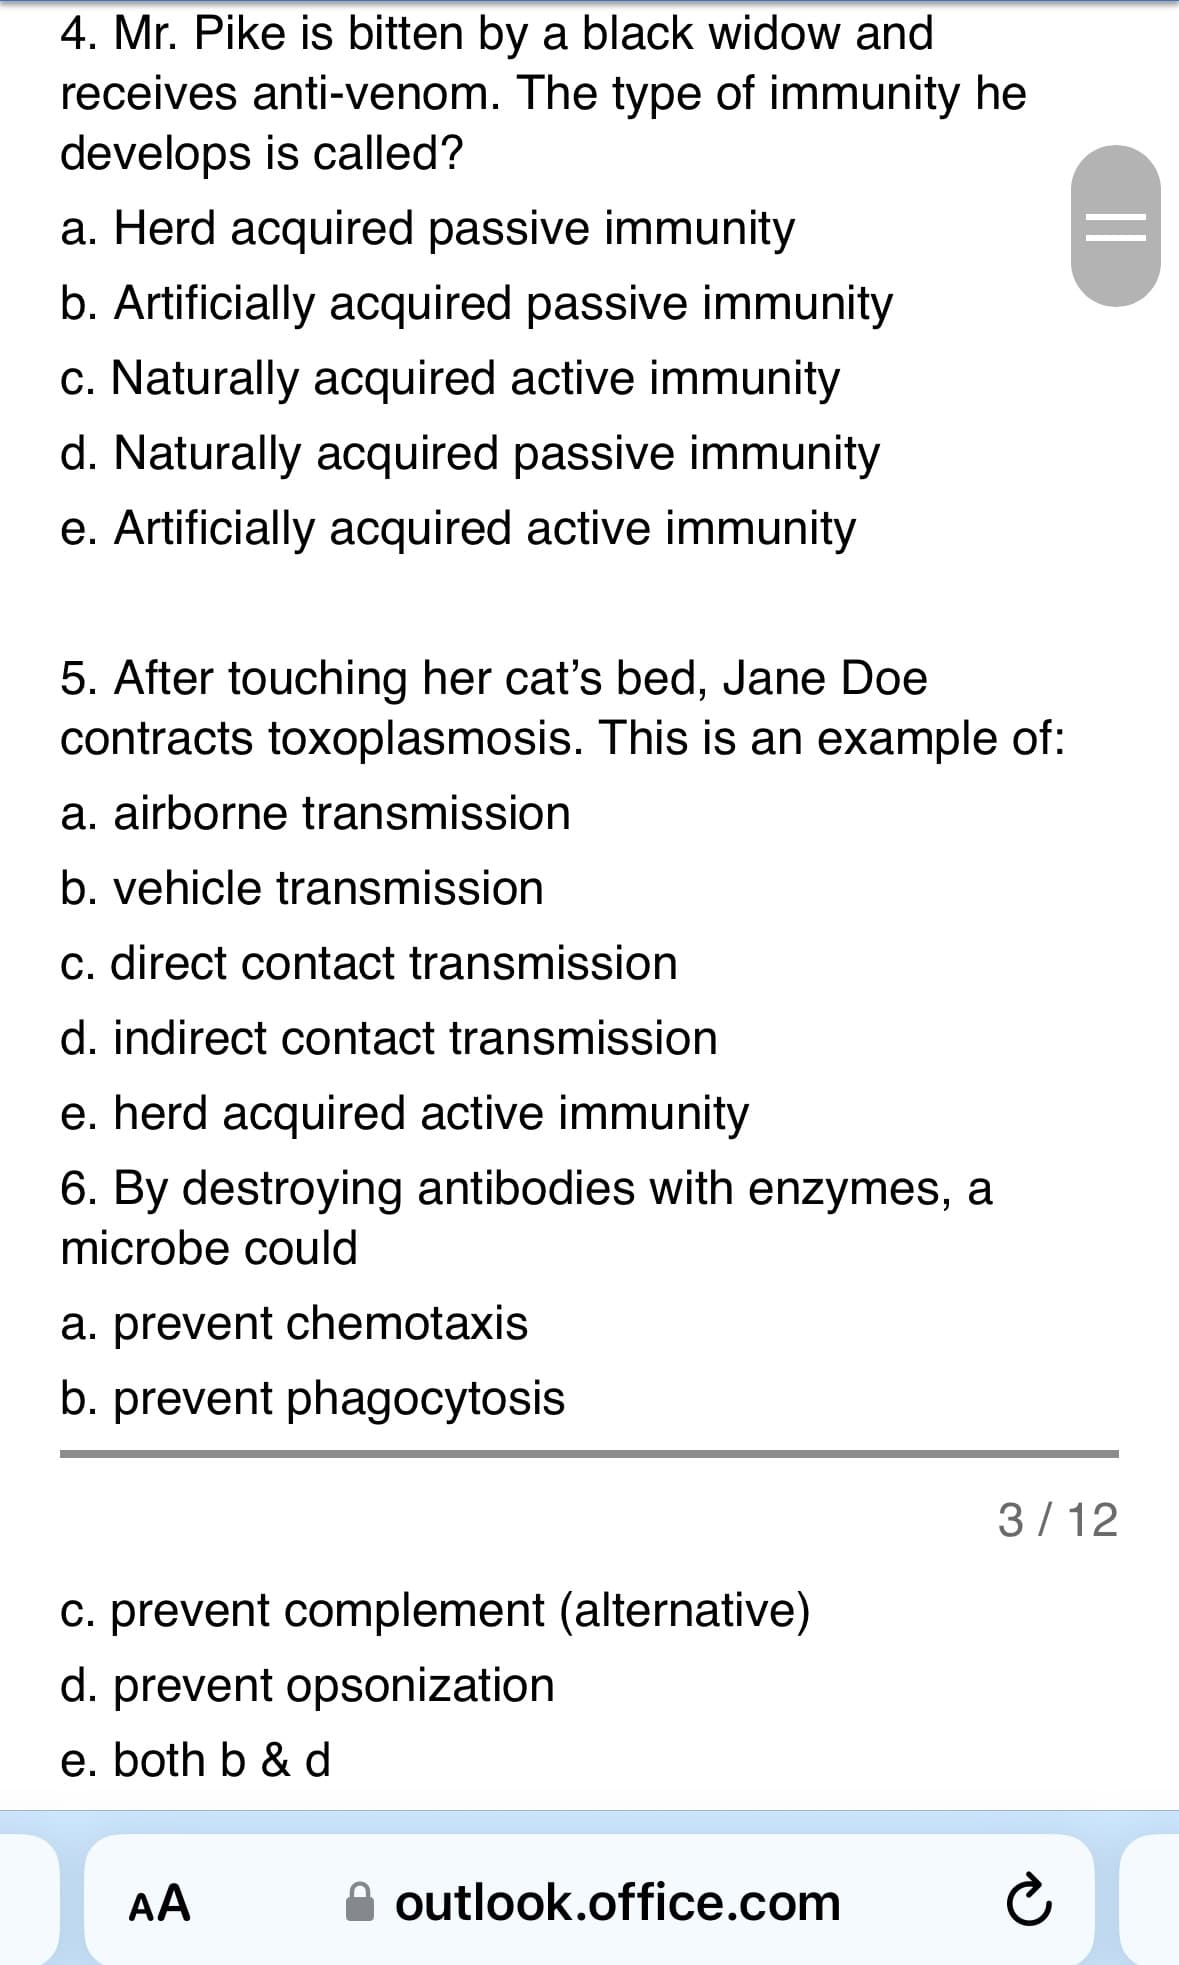 4. Mr. Pike is bitten by a black widow and
receives anti-venom. The type of immunity he
develops is called?
a. Herd acquired passive immunity
b. Artificially acquired passive immunity
c. Naturally acquired active immunity
d. Naturally acquired passive immunity
e. Artificially acquired active immunity
5. After touching her cat's bed, Jane Doe
contracts toxoplasmosis. This is an example of:
a. airborne transmission
b. vehicle transmission
c. direct contact transmission
d. indirect contact transmission
e. herd acquired active immunity
6. By destroying antibodies with enzymes, a
microbe could
a. prevent chemotaxis
b. prevent phagocytosis
c. prevent complement (alternative)
d. prevent opsonization
e. both b & d
J
AA
outlook.office.com
||
3/12
¿